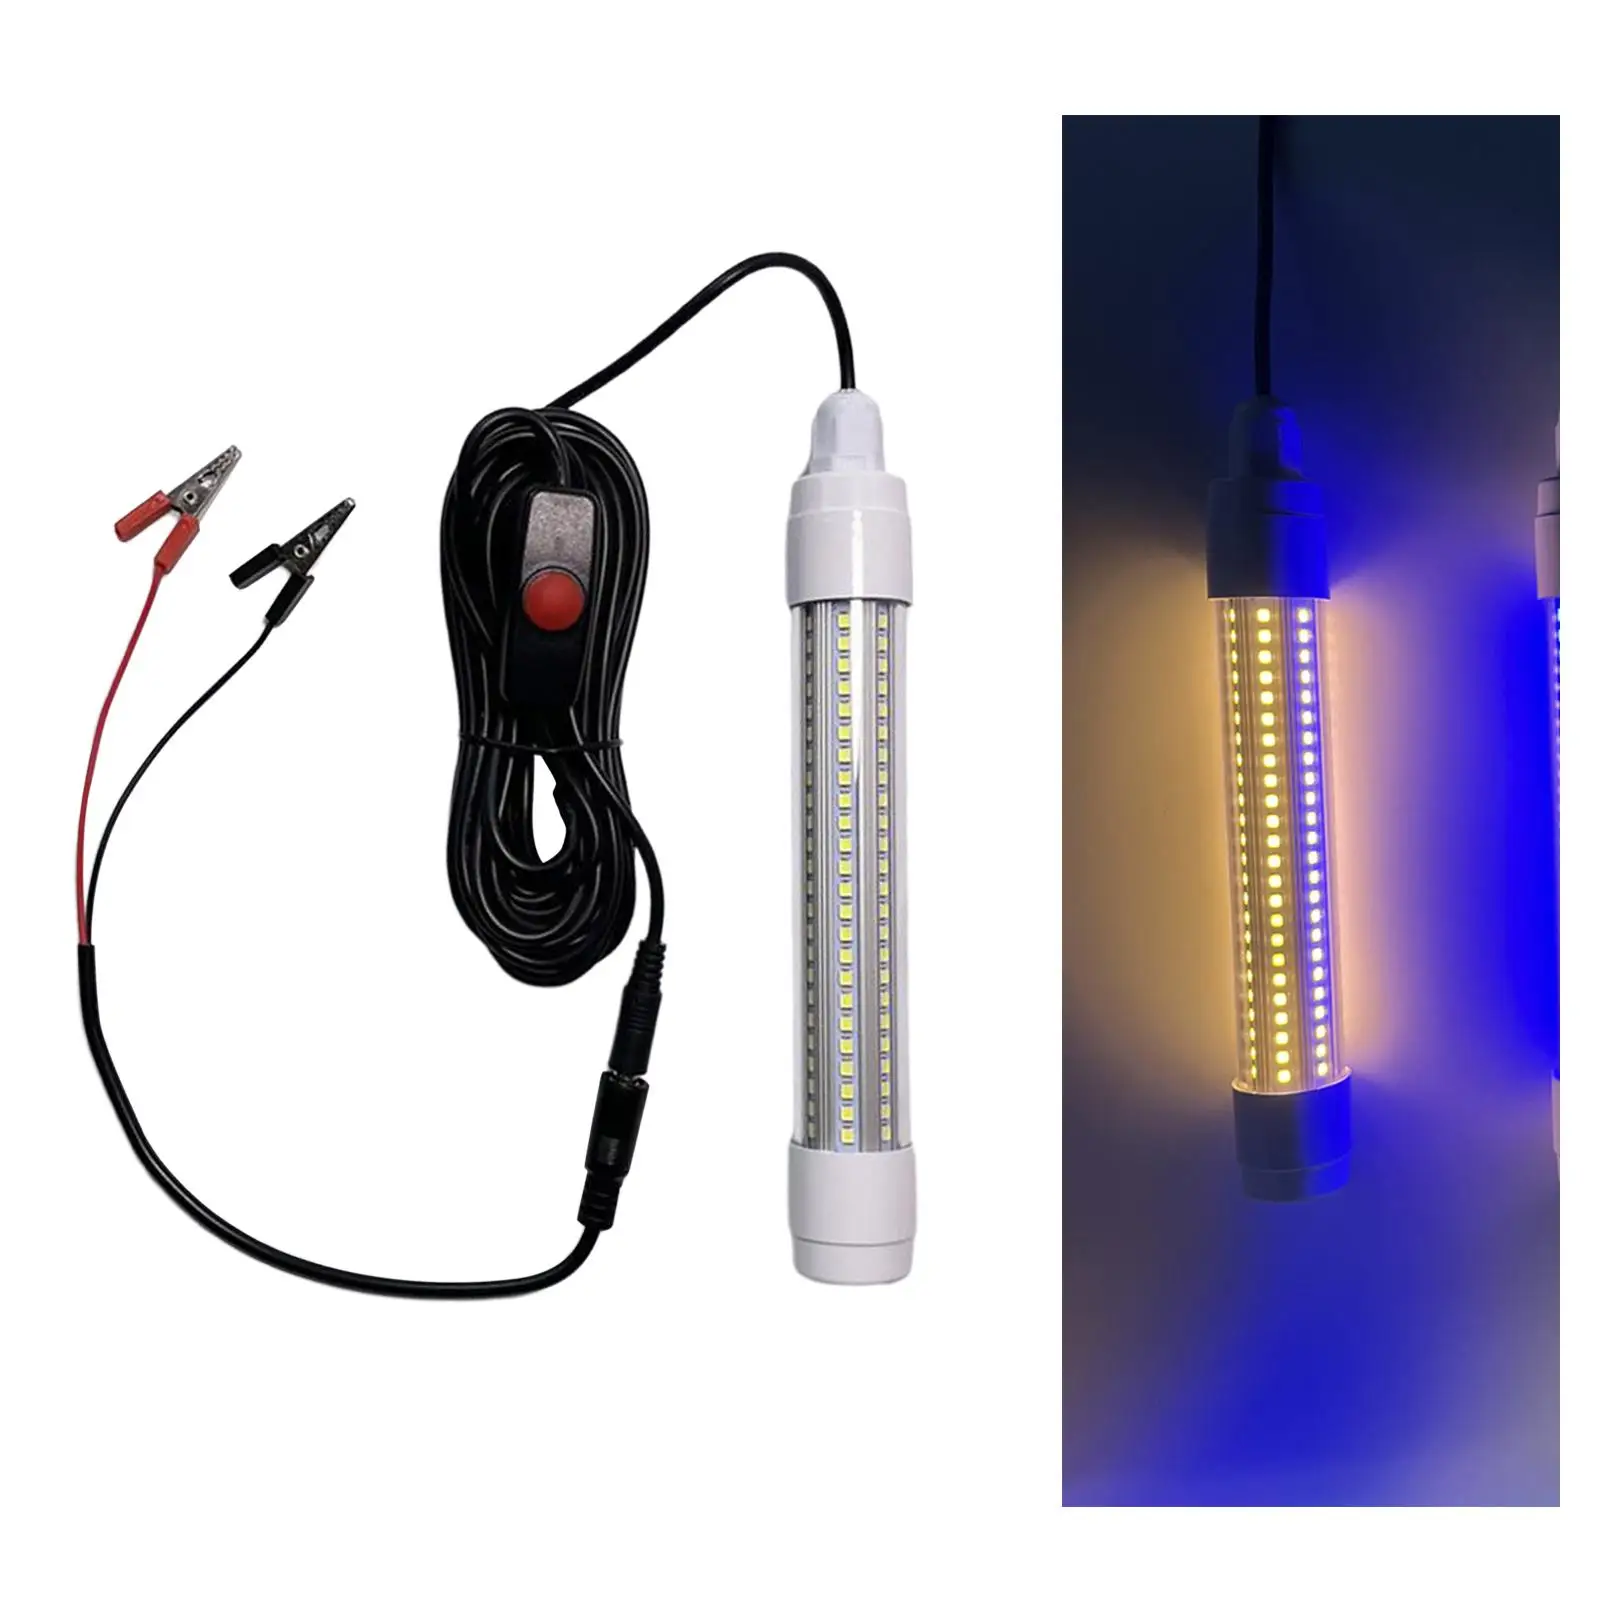 underwater boat lights 12V Fishing Light Lamps Submersible Underwater with 5M Cord 144LED for Shad Squid Squid Lure Attract Boat Accessories underwater lights